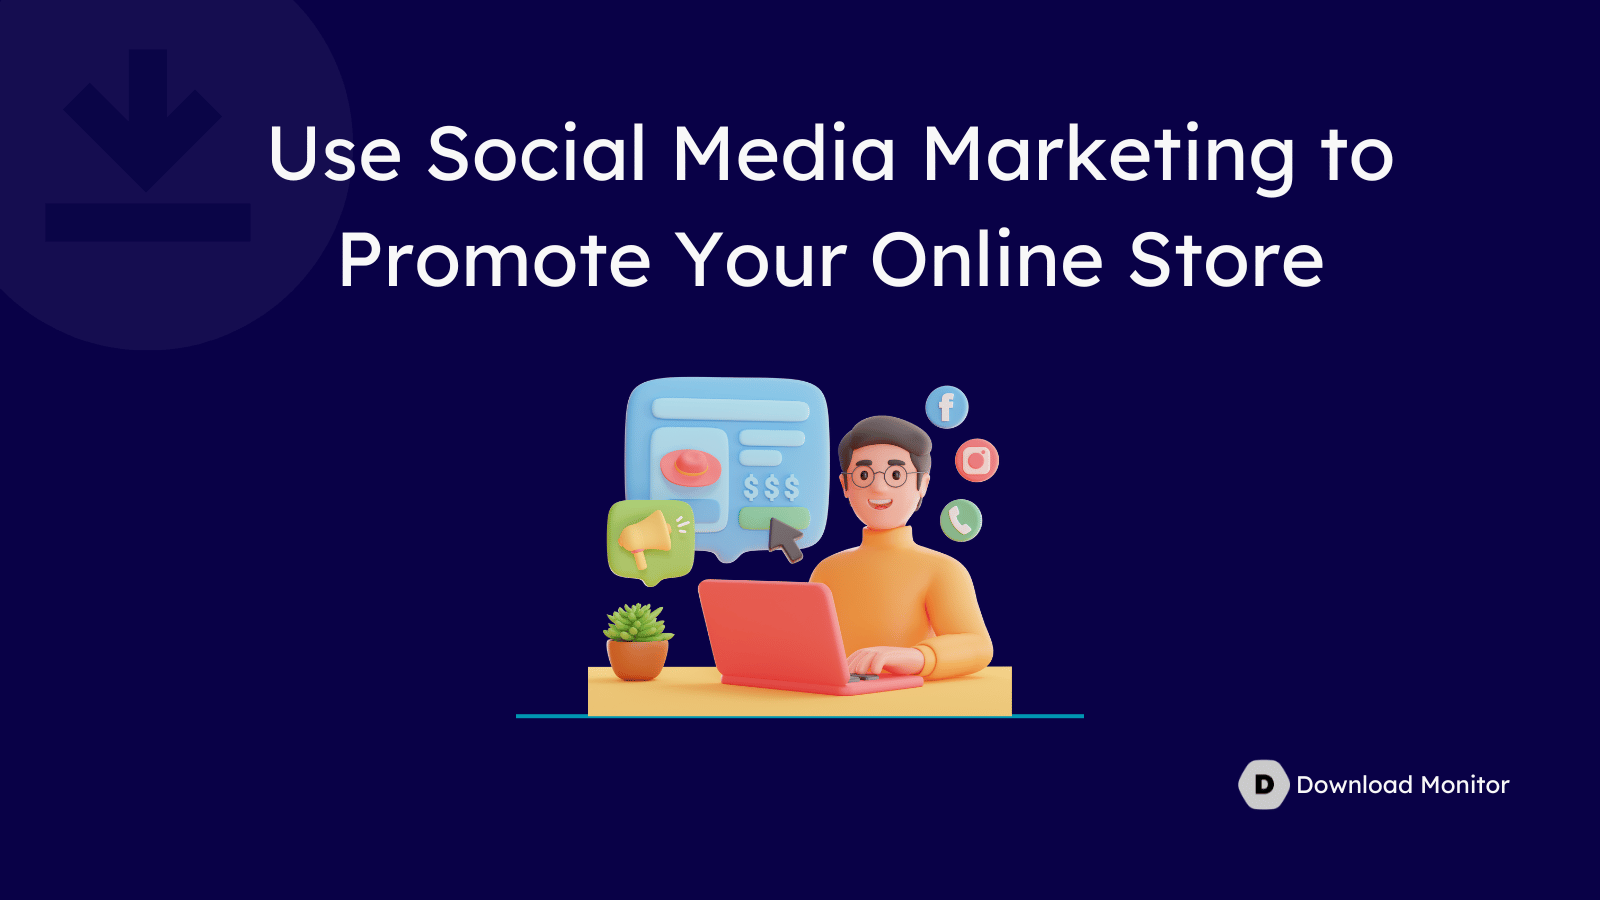 Use Social Media Marketing to Promote Your Online Store 